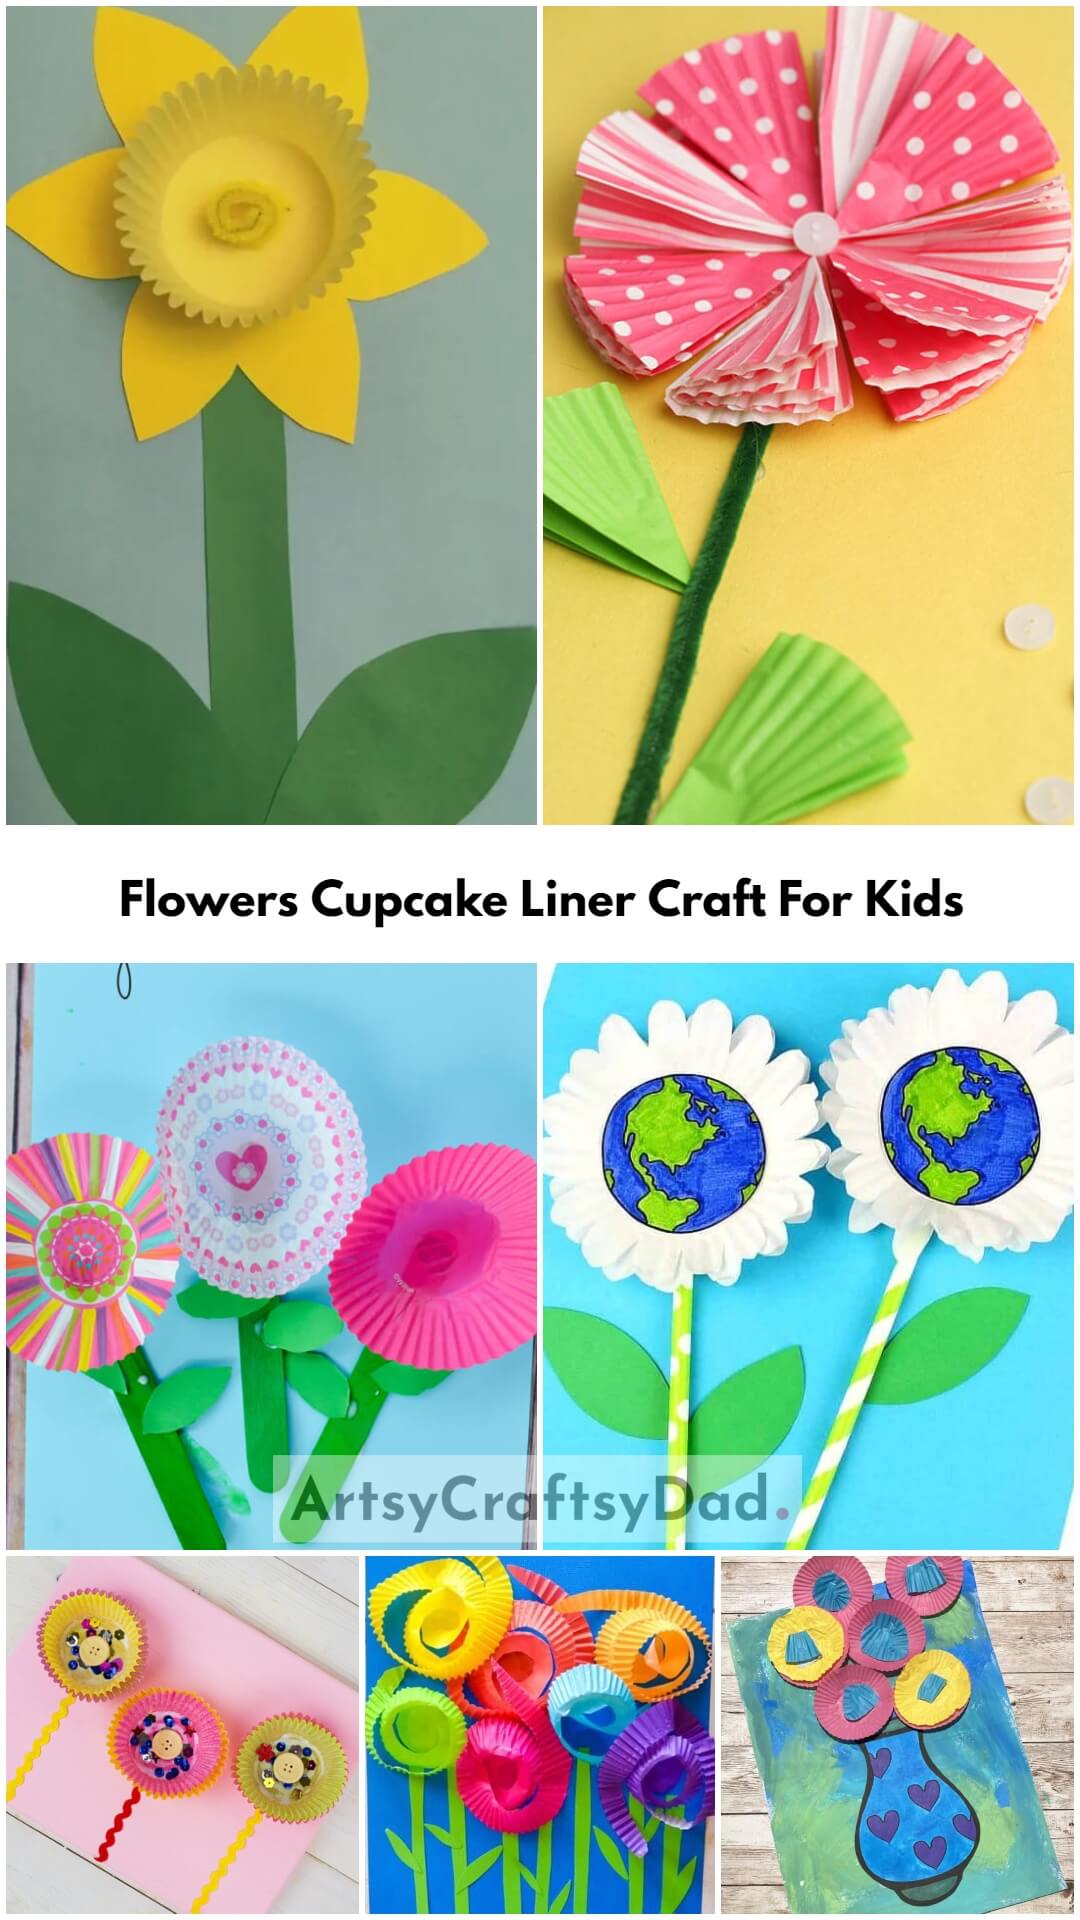 Simple To Make Flowers Cupcake Liner Craft For Kids